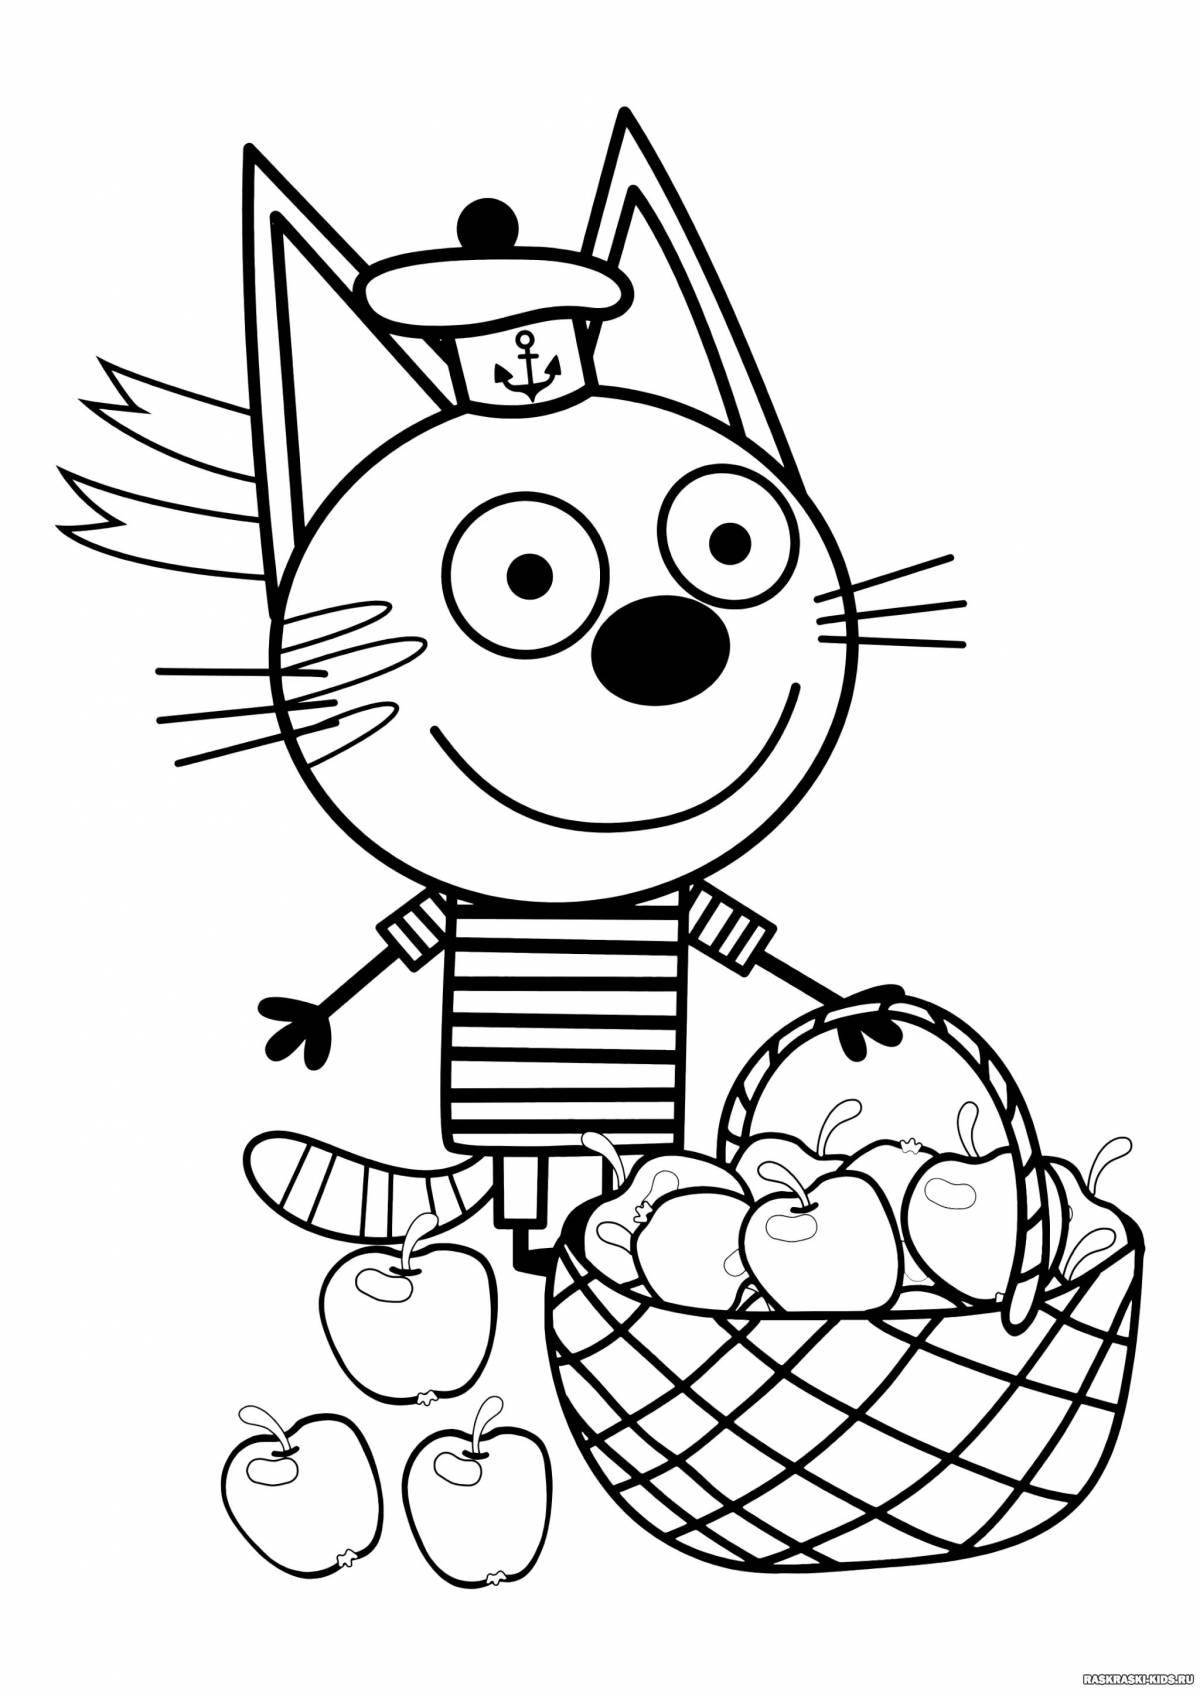 Animated shortbread coloring page for kids